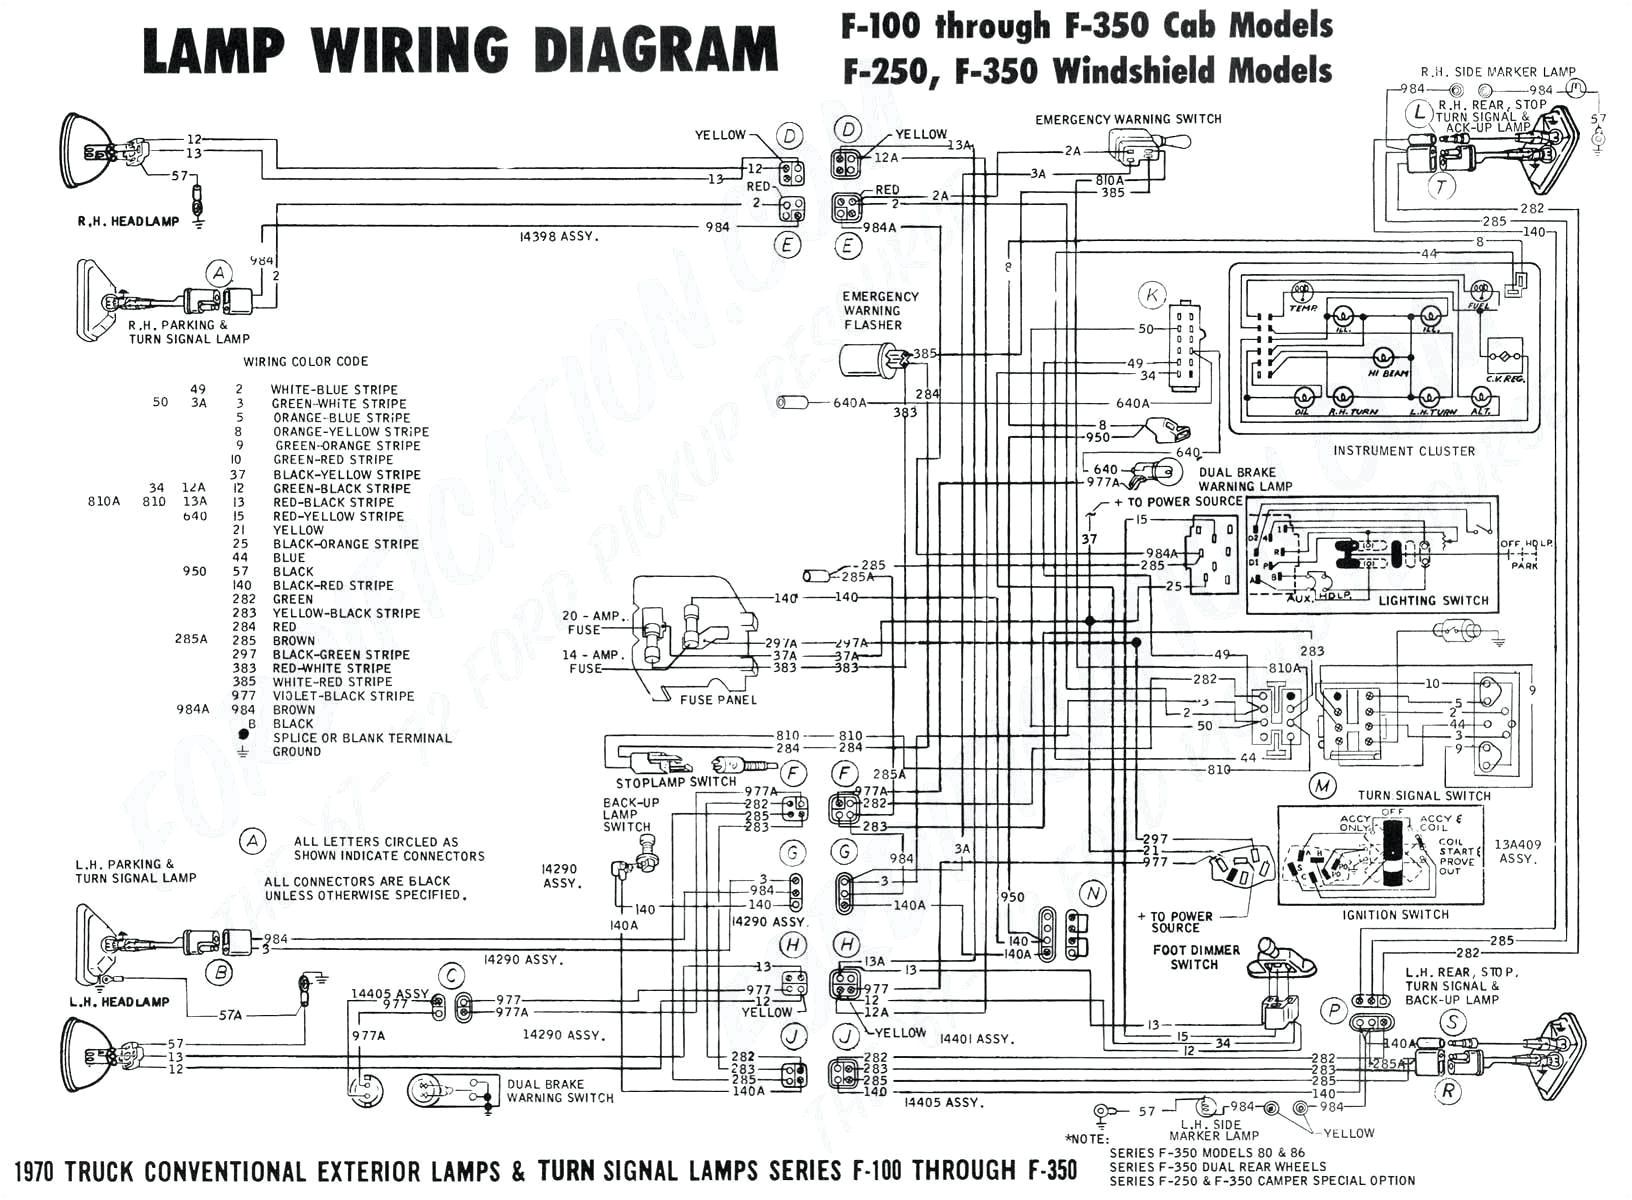 wiring diagram for nissan 350z online manuual of wiring diagram nissan 350z ecu wiring diagram schema